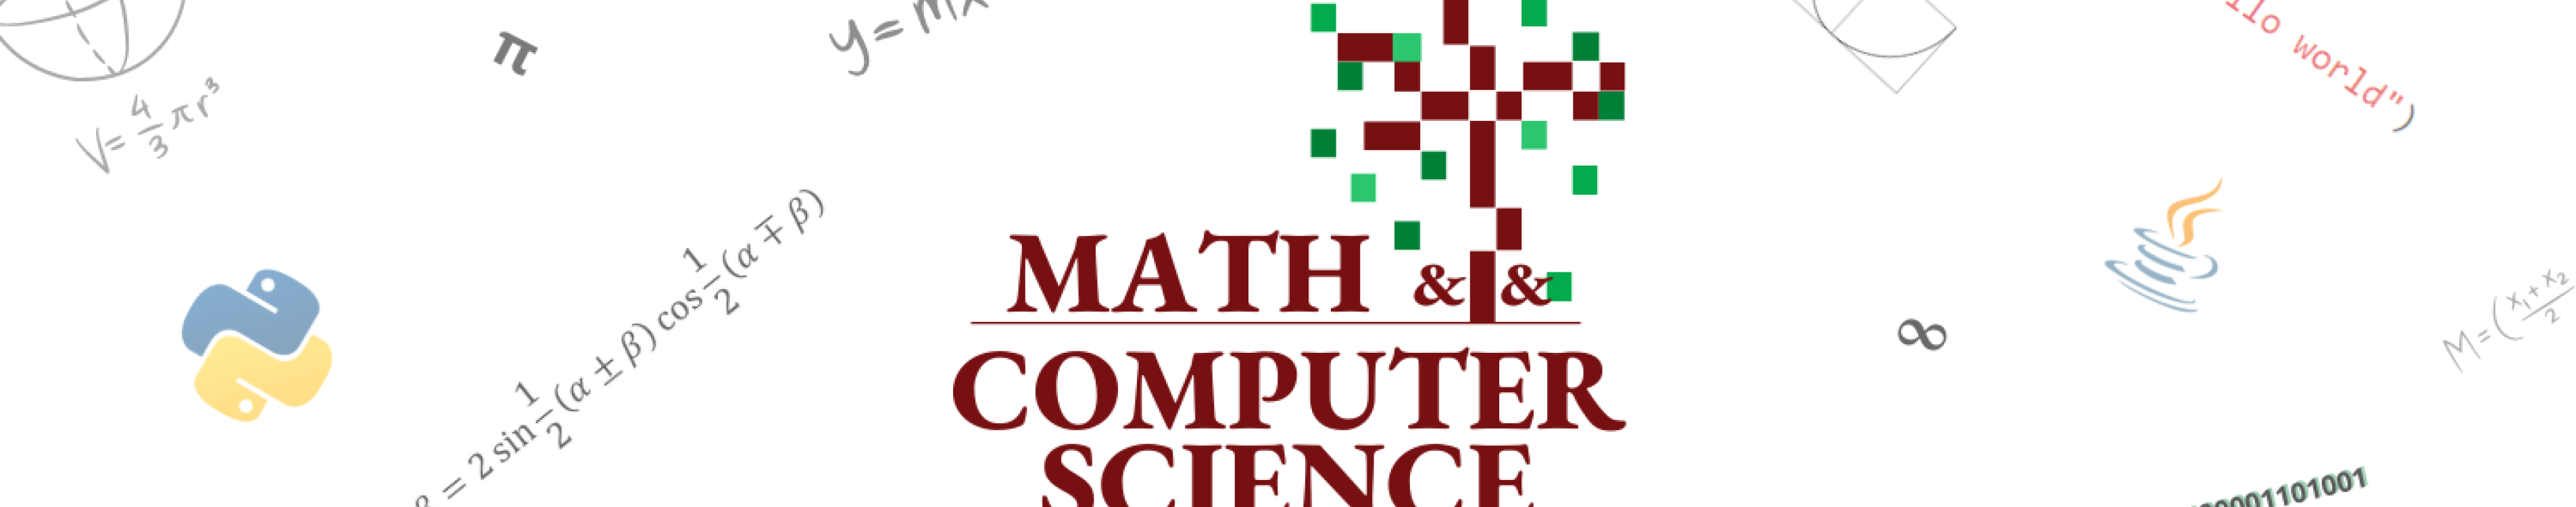 Math and Computer science logo with random equations and code snippets around it.